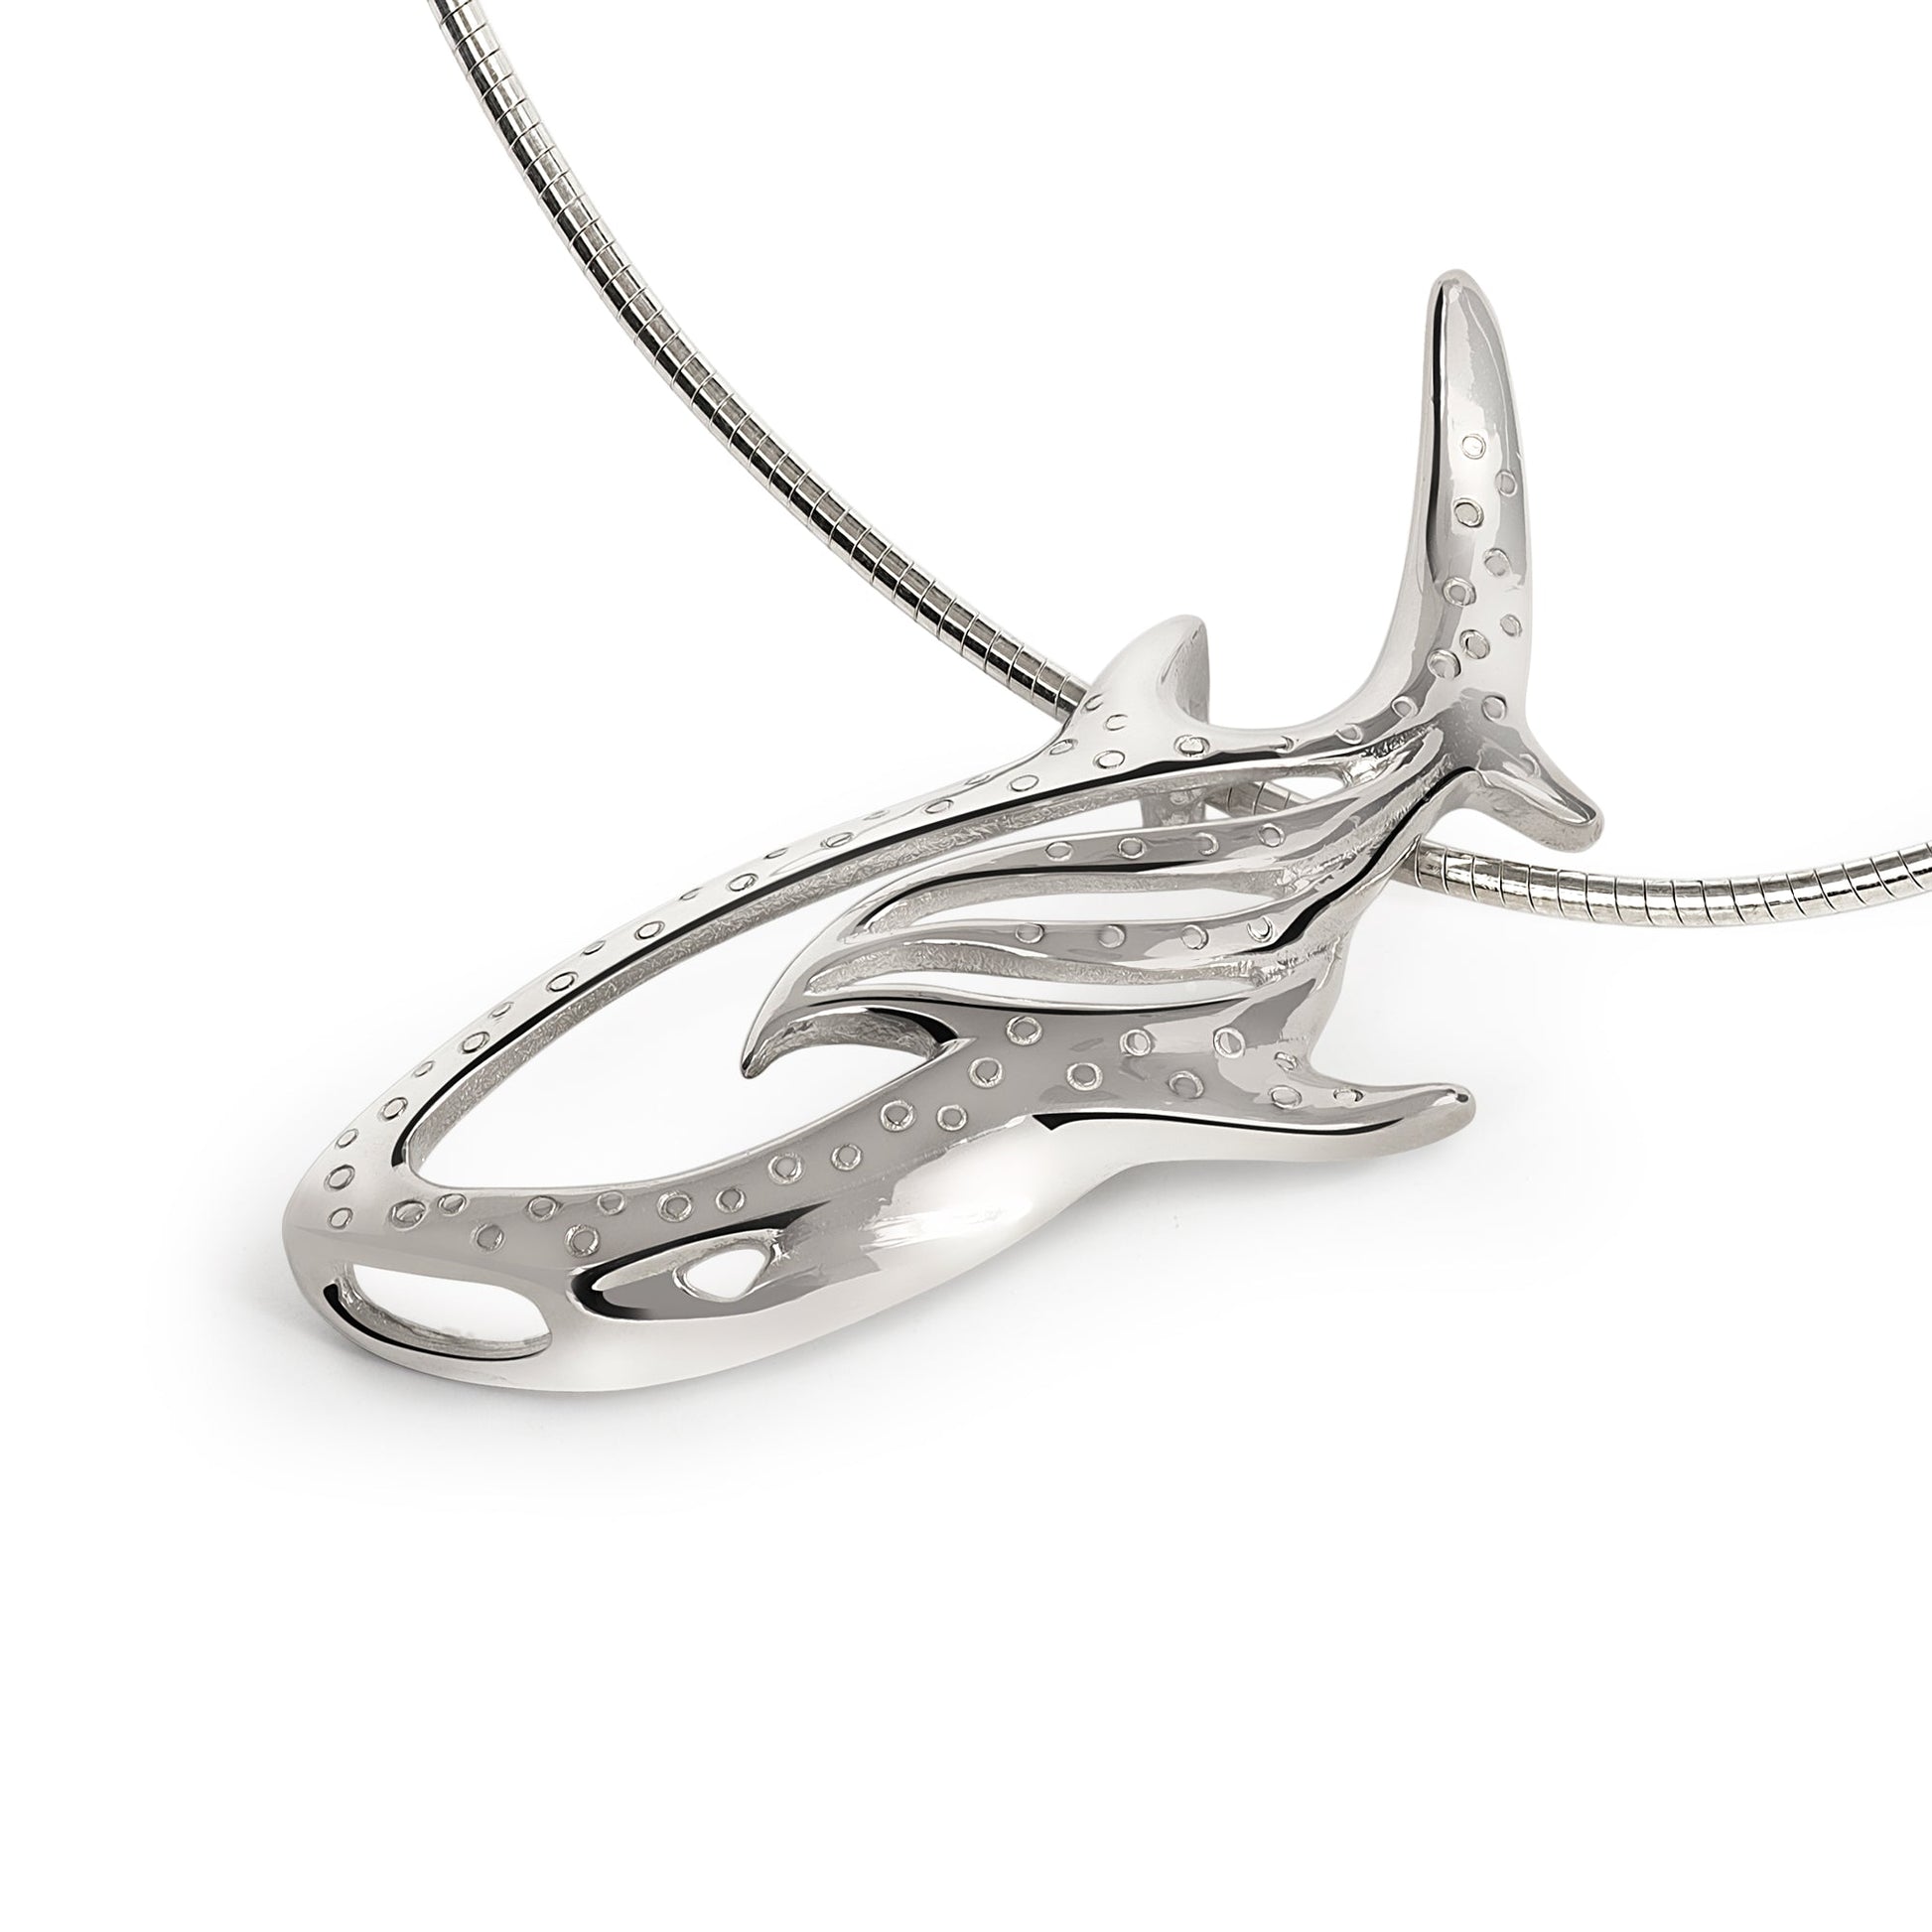 Whale Shark Necklace Charm for Women- Whale Shark Sterling Silver Jewelry, Shark Gifts for Shark Lovers, Scuba Diving Gifts, Scuba Diving Jewelry - The Tool Store